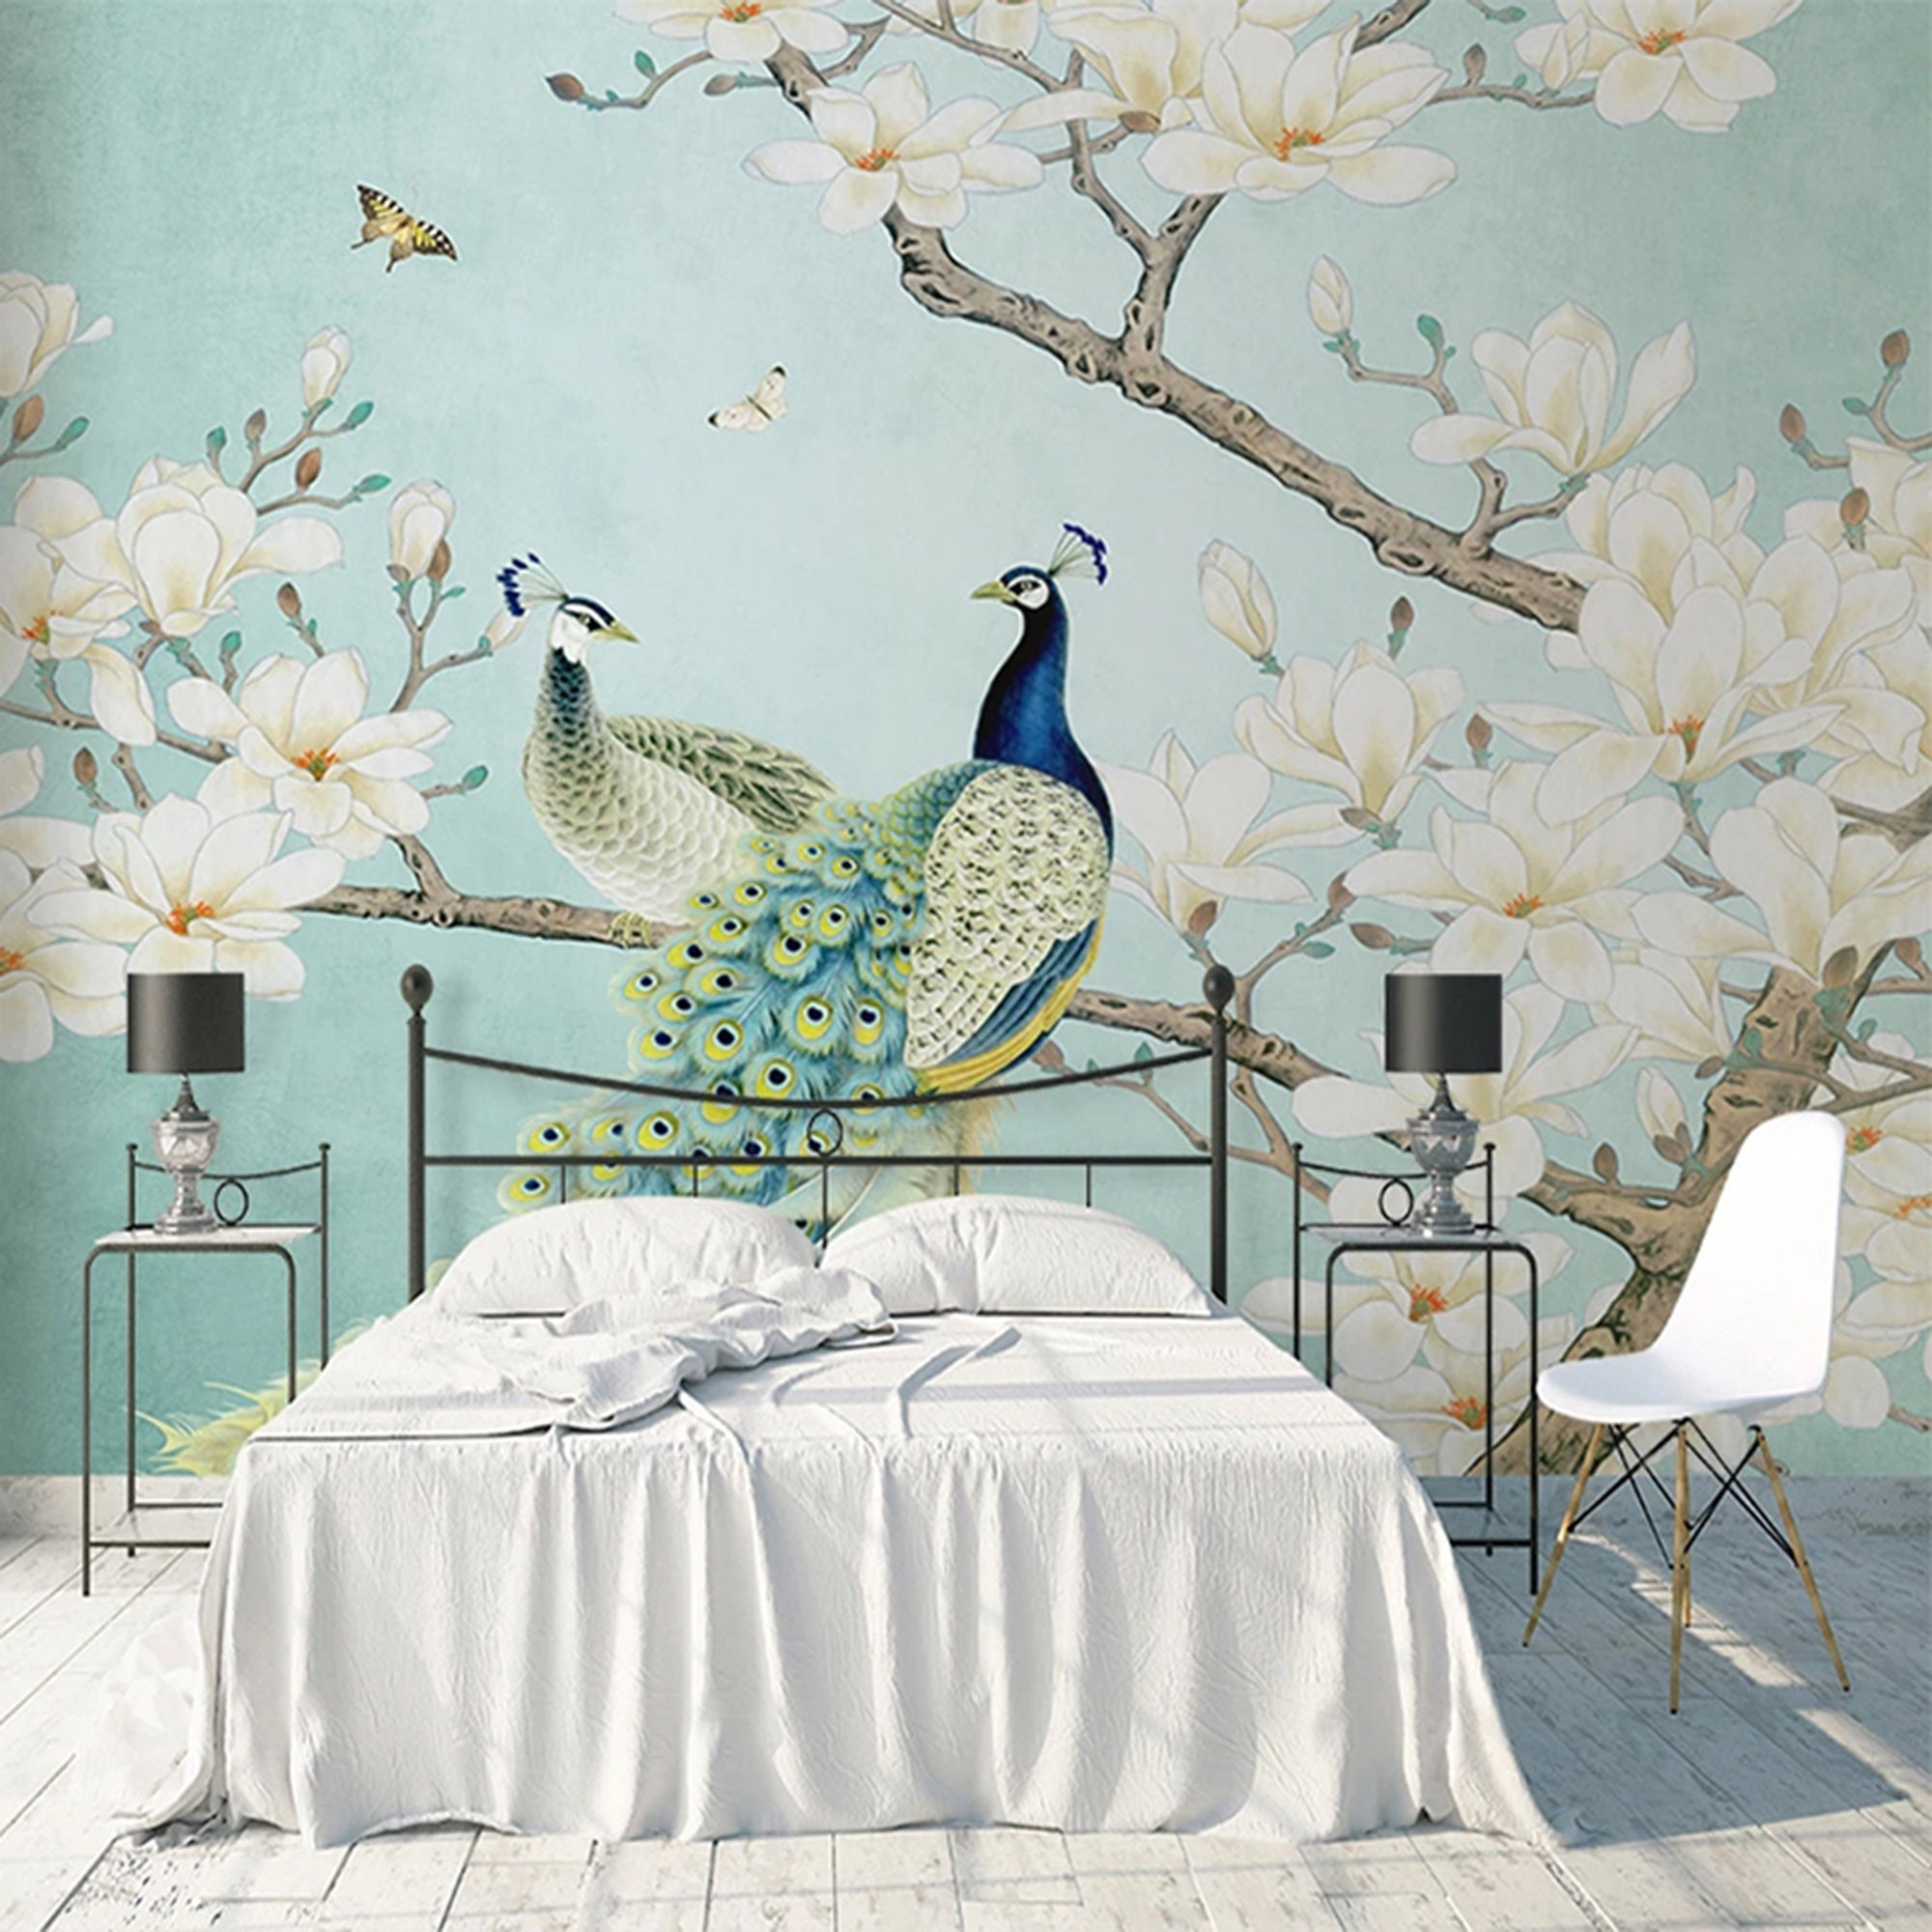 3D Eye-catching Peacock ZZ784 Self-adhesive Wallpaper Mural Peel and Stick Wallpaper Removable Wall Prints Stickers Feature Wall Wallpaper